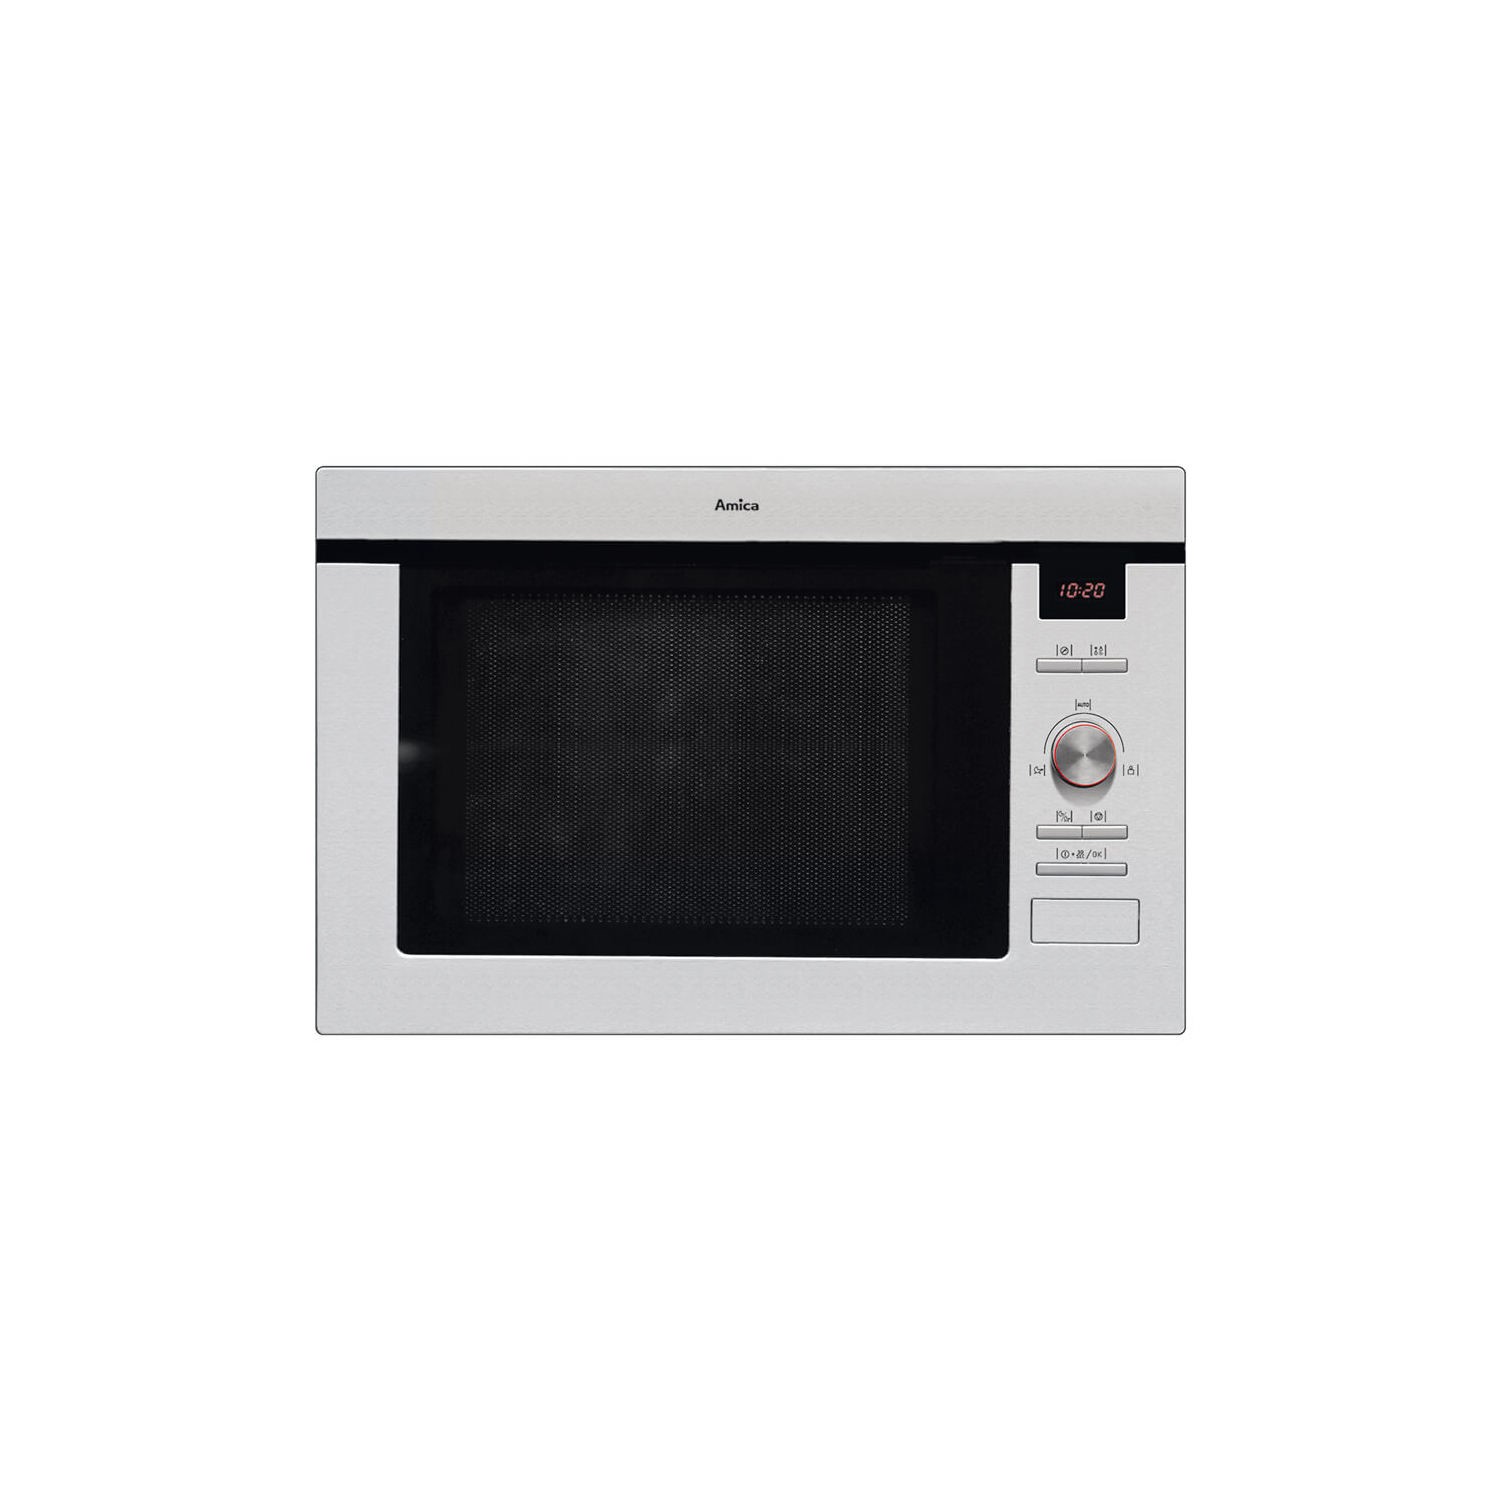 Amica AMM25BI Built-In Microwave With Grill in Stainless Steel 